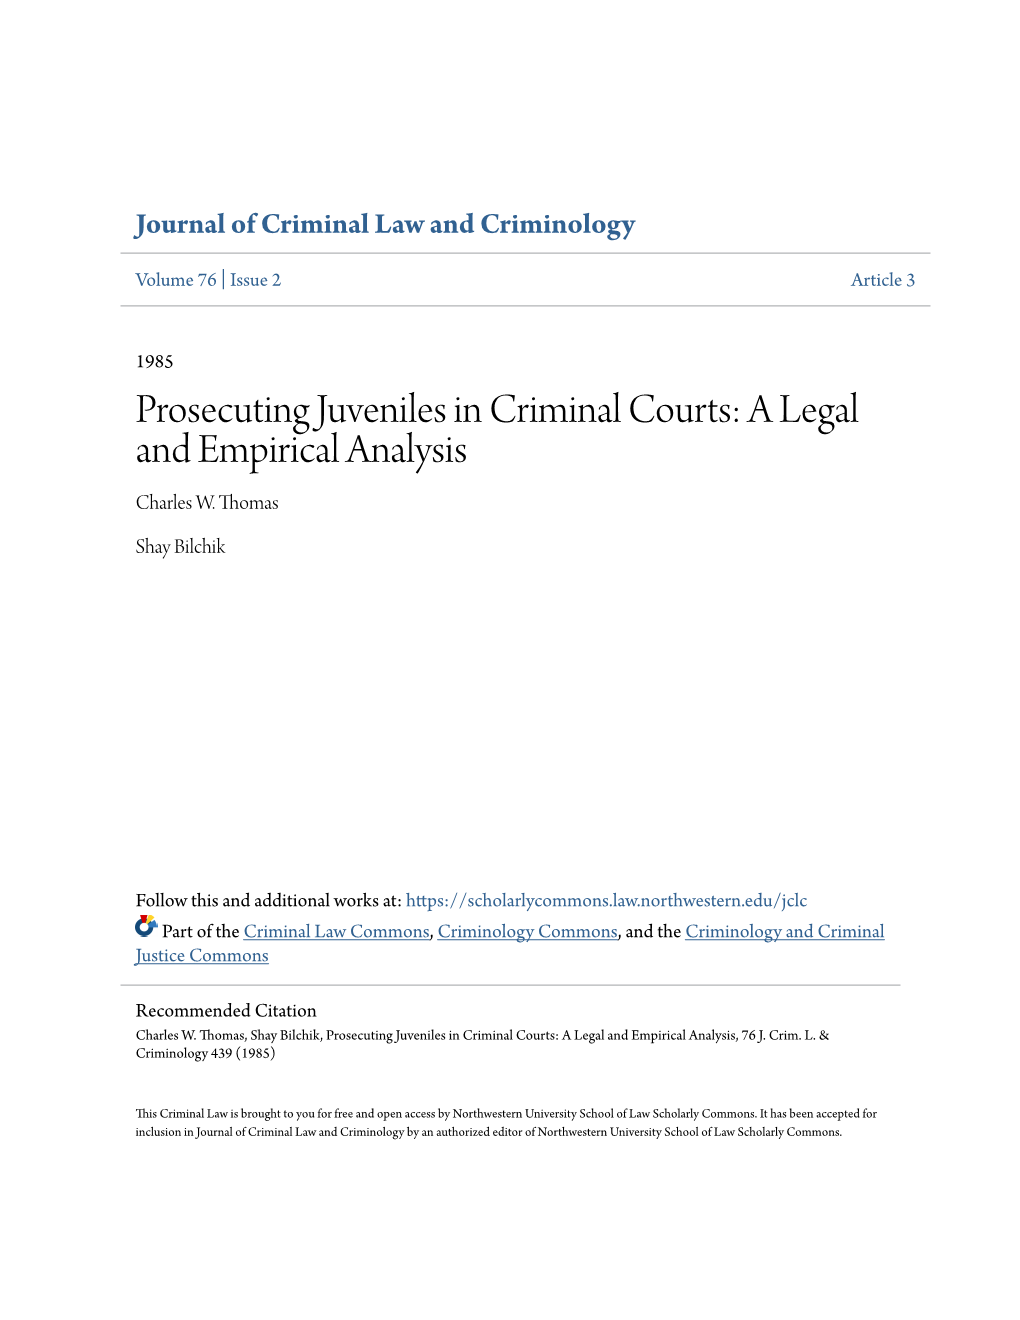 Prosecuting Juveniles in Criminal Courts: a Legal and Empirical Analysis Charles W